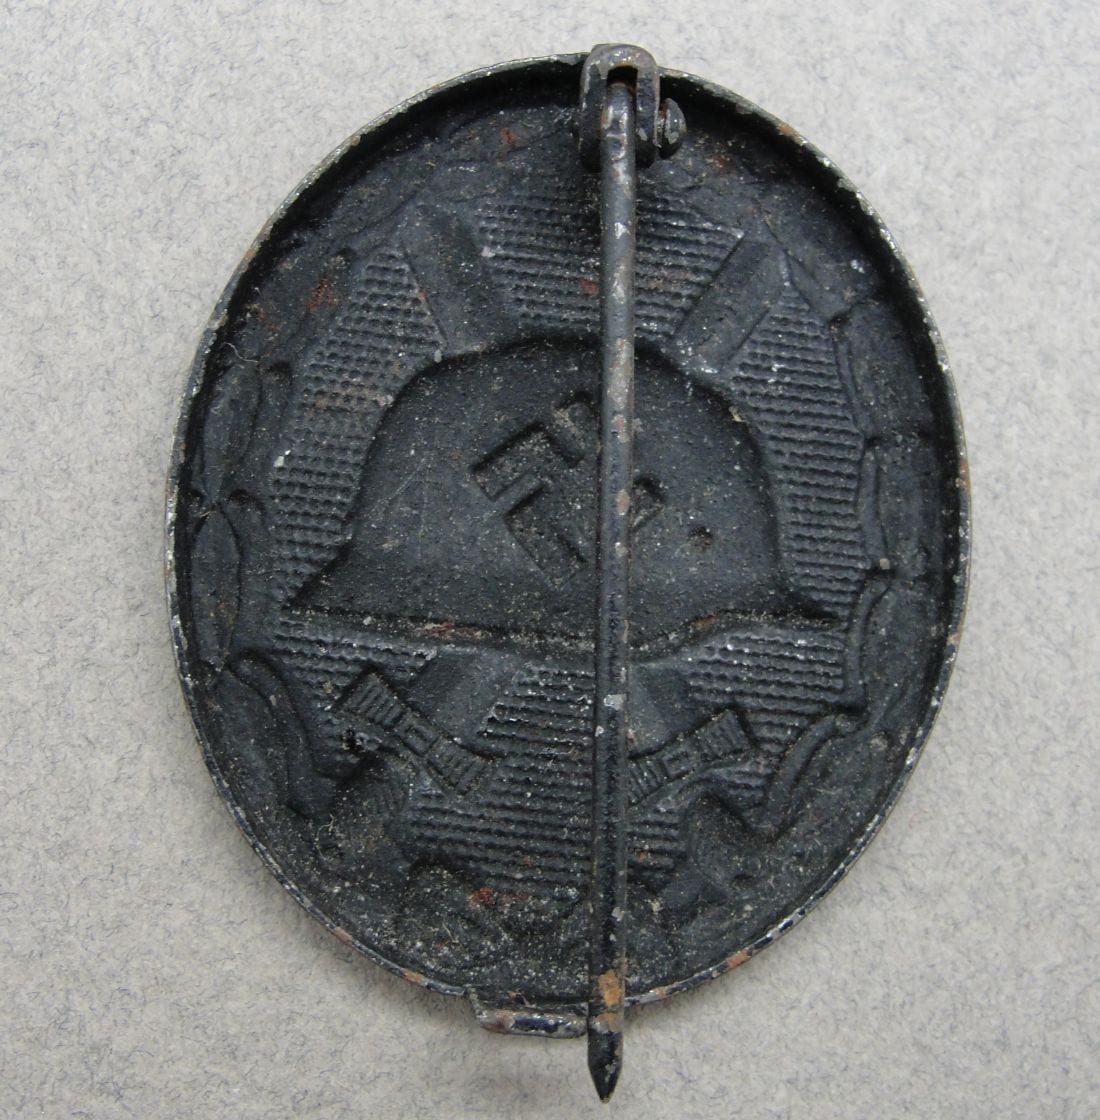 1939 Wound Badge, Black Grade, by "81"